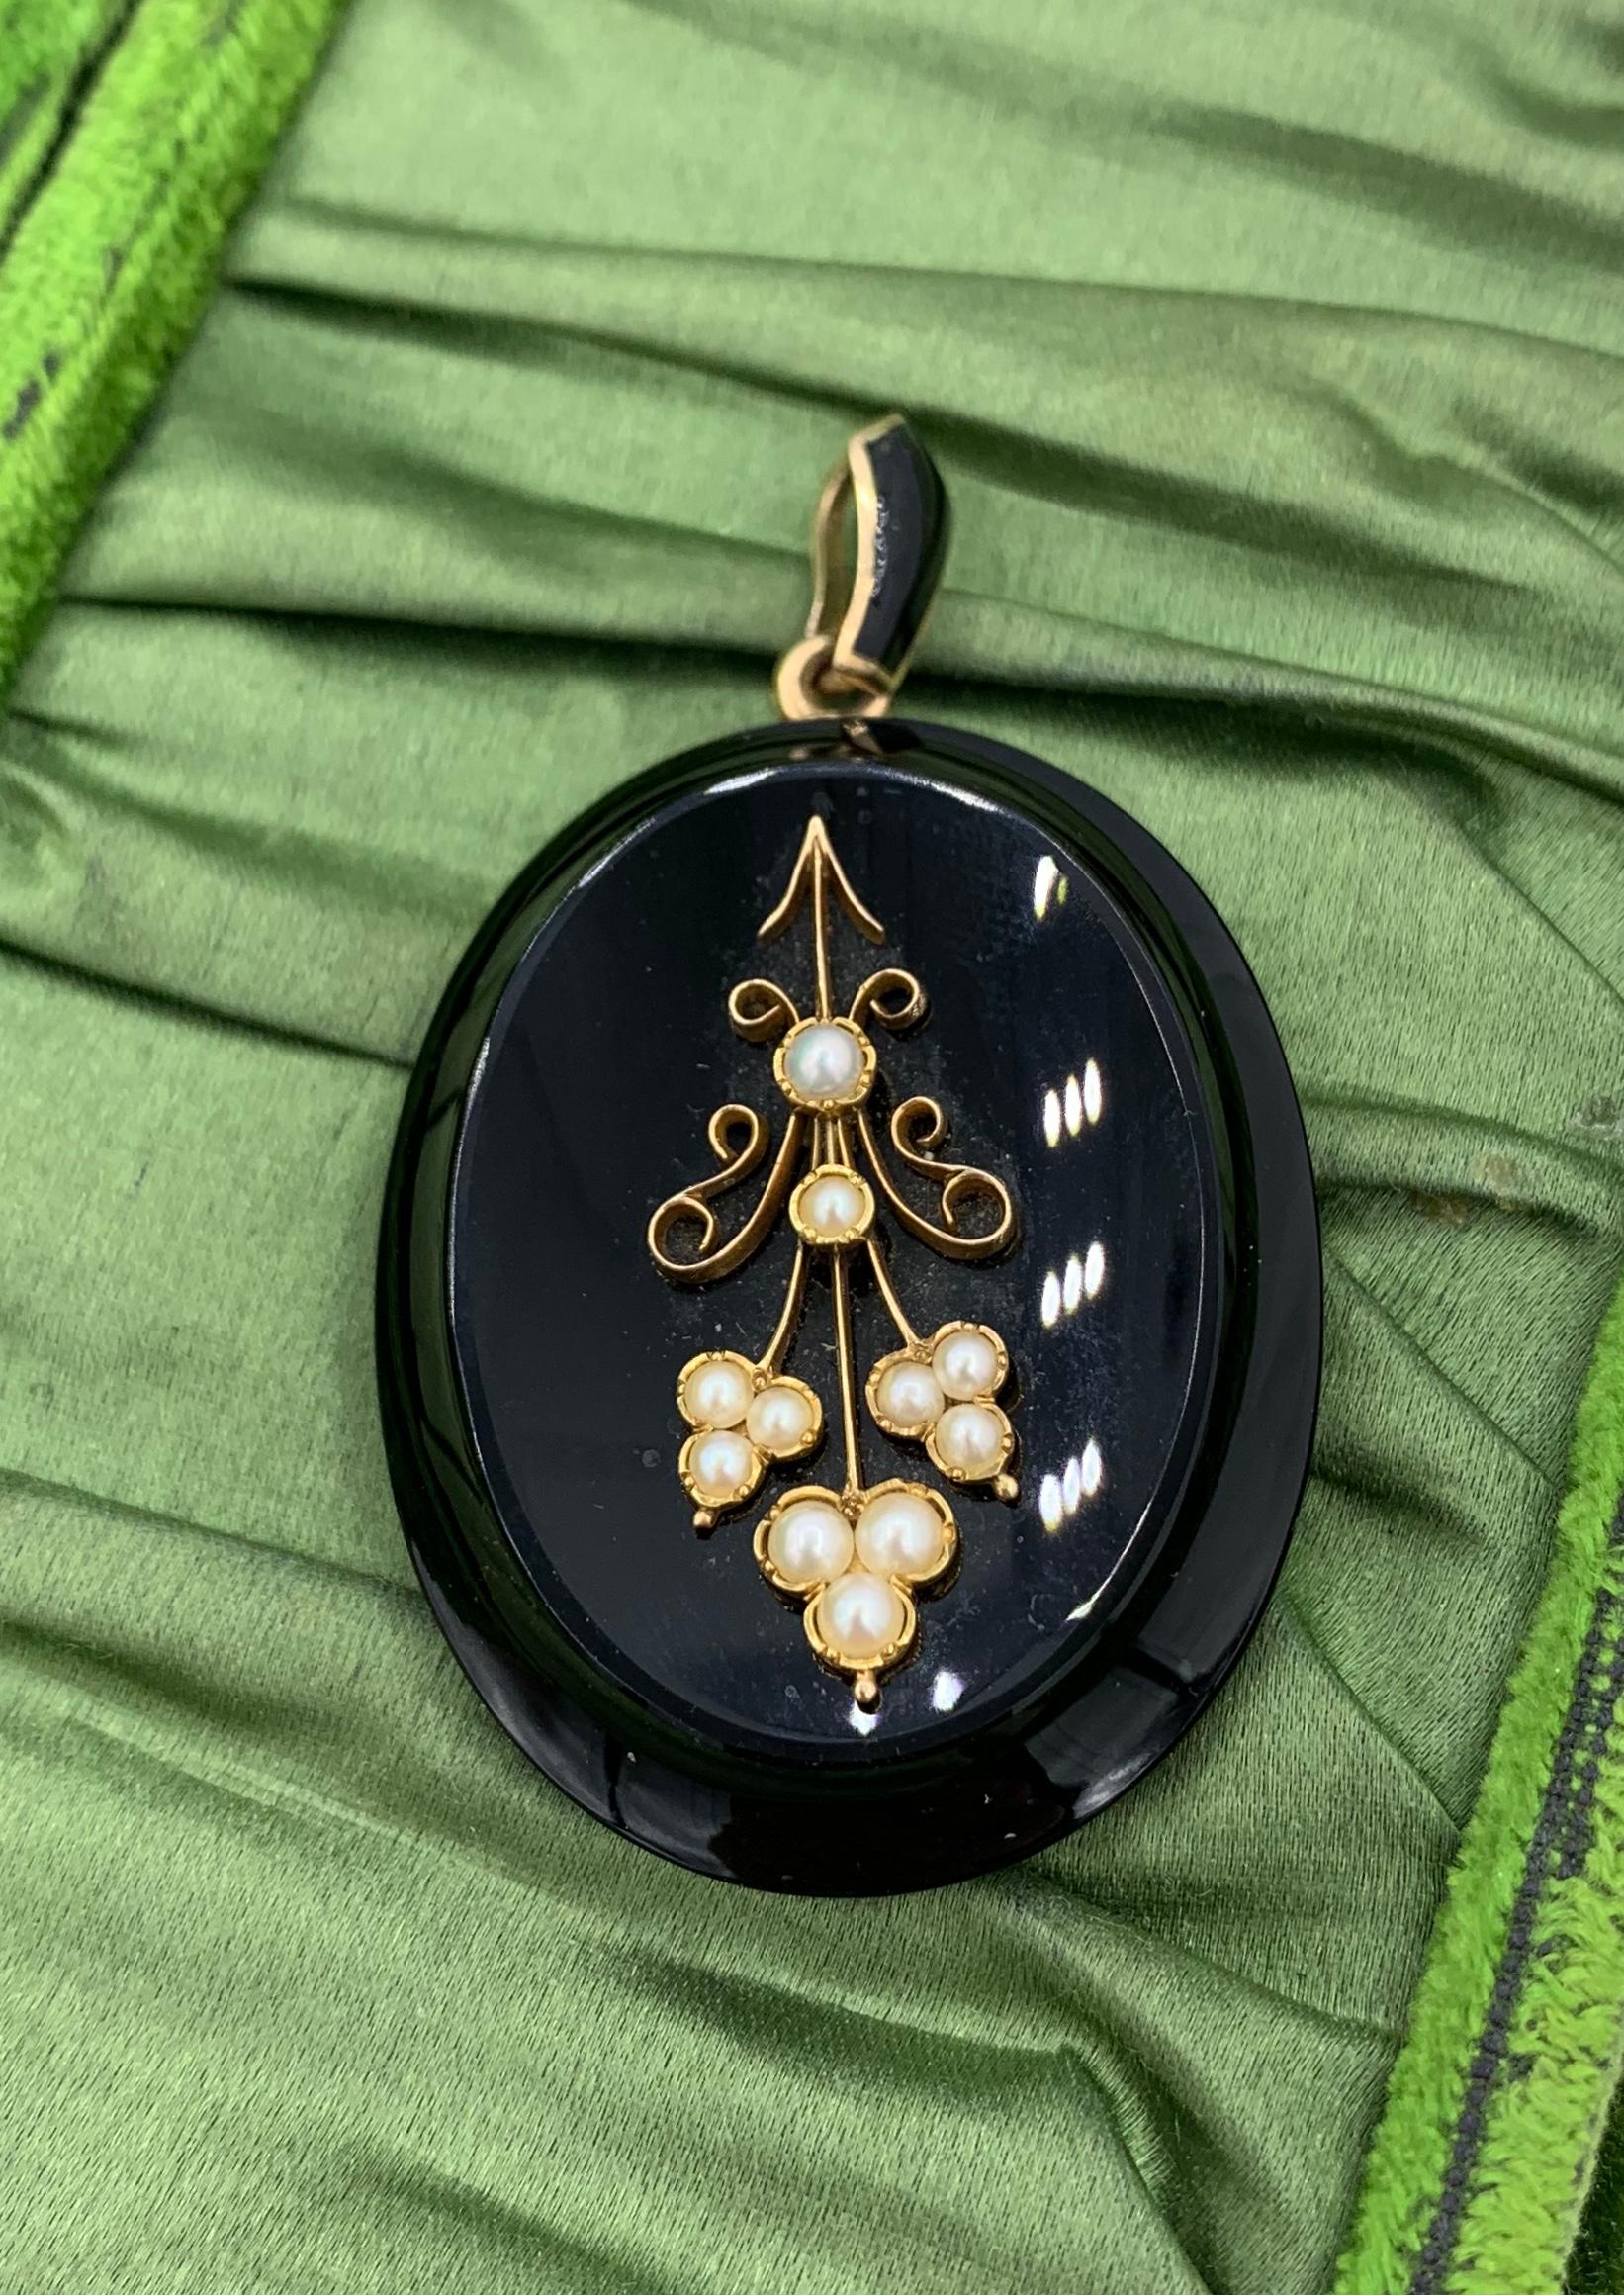 This is a magnificent Victorian - Belle Epoque Picture locket pendant necklace in Black Onyx, and 14 Karat Gold with Pearl adornments in a Flower Motif design with an exquisite braided hair checkerboard design on the reverse.  This is one of the